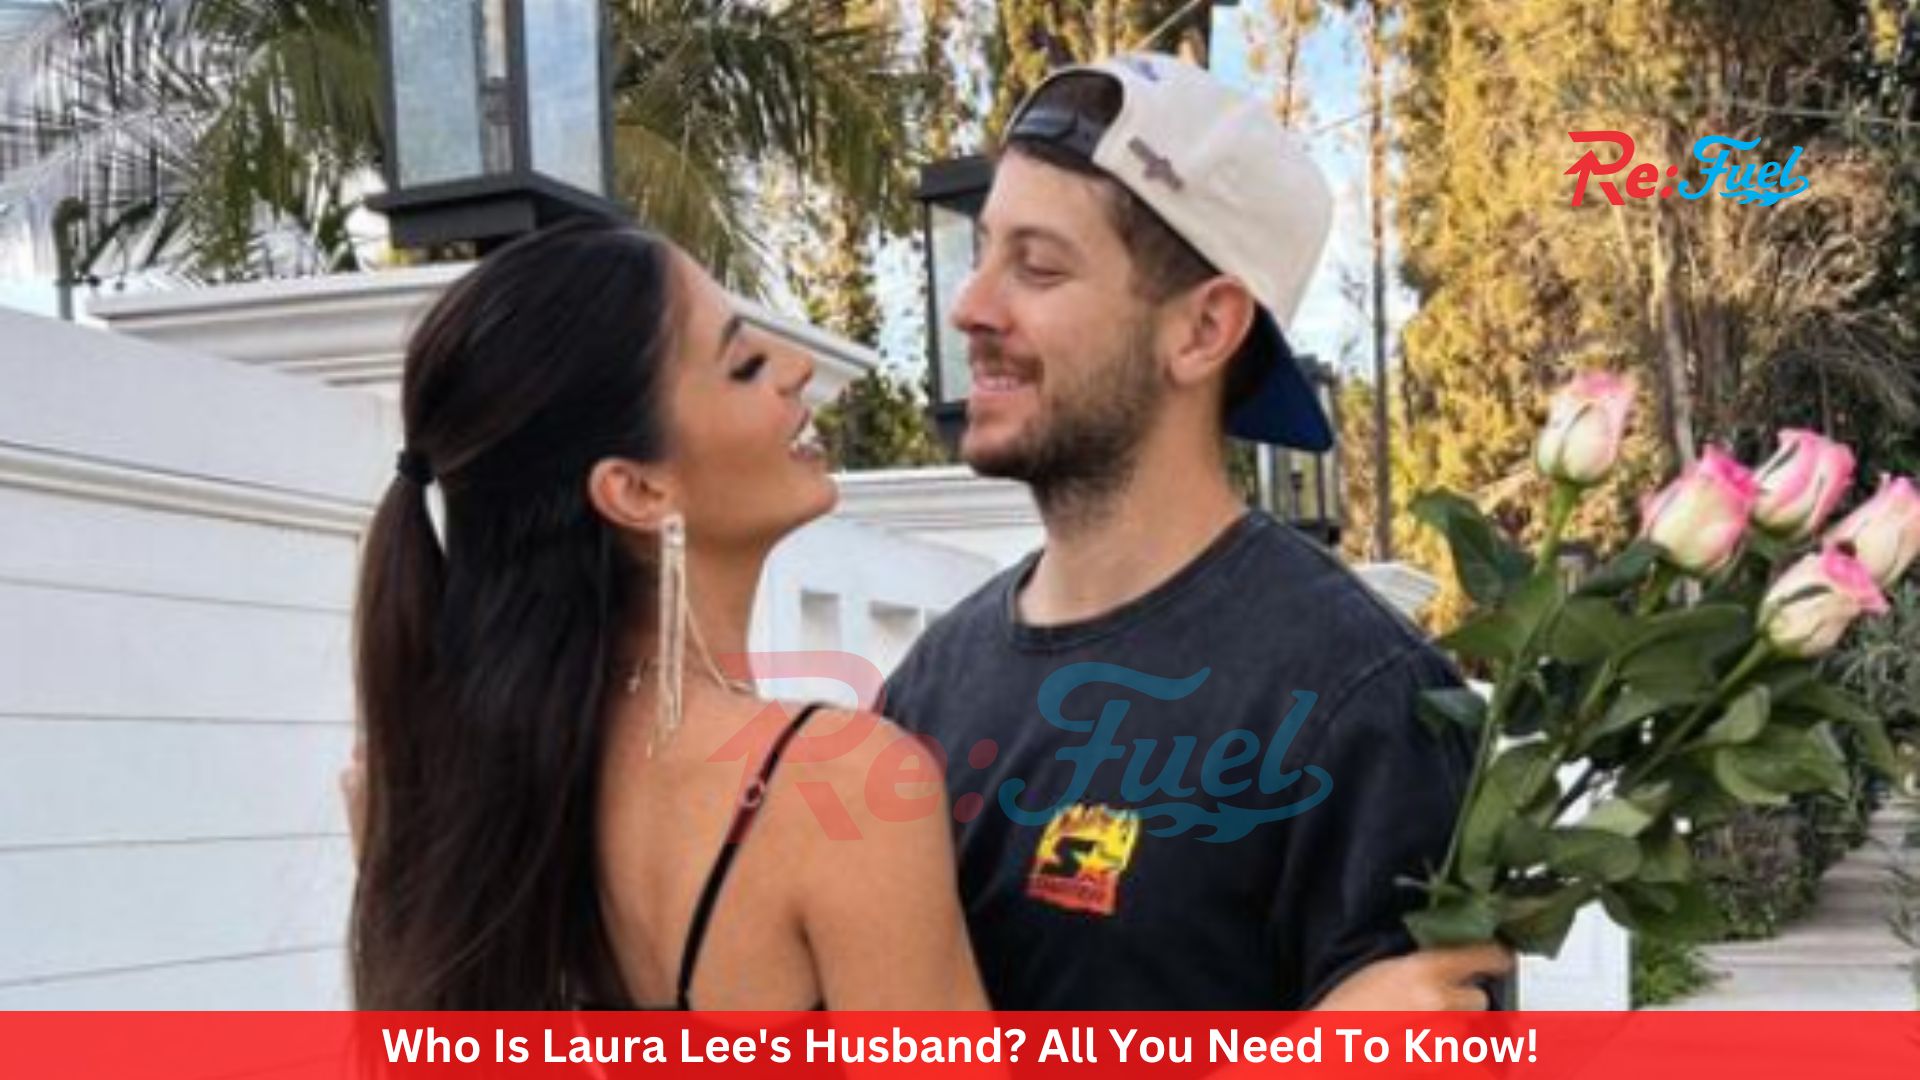 Who Is Laura Lee's Husband? All You Need To Know!